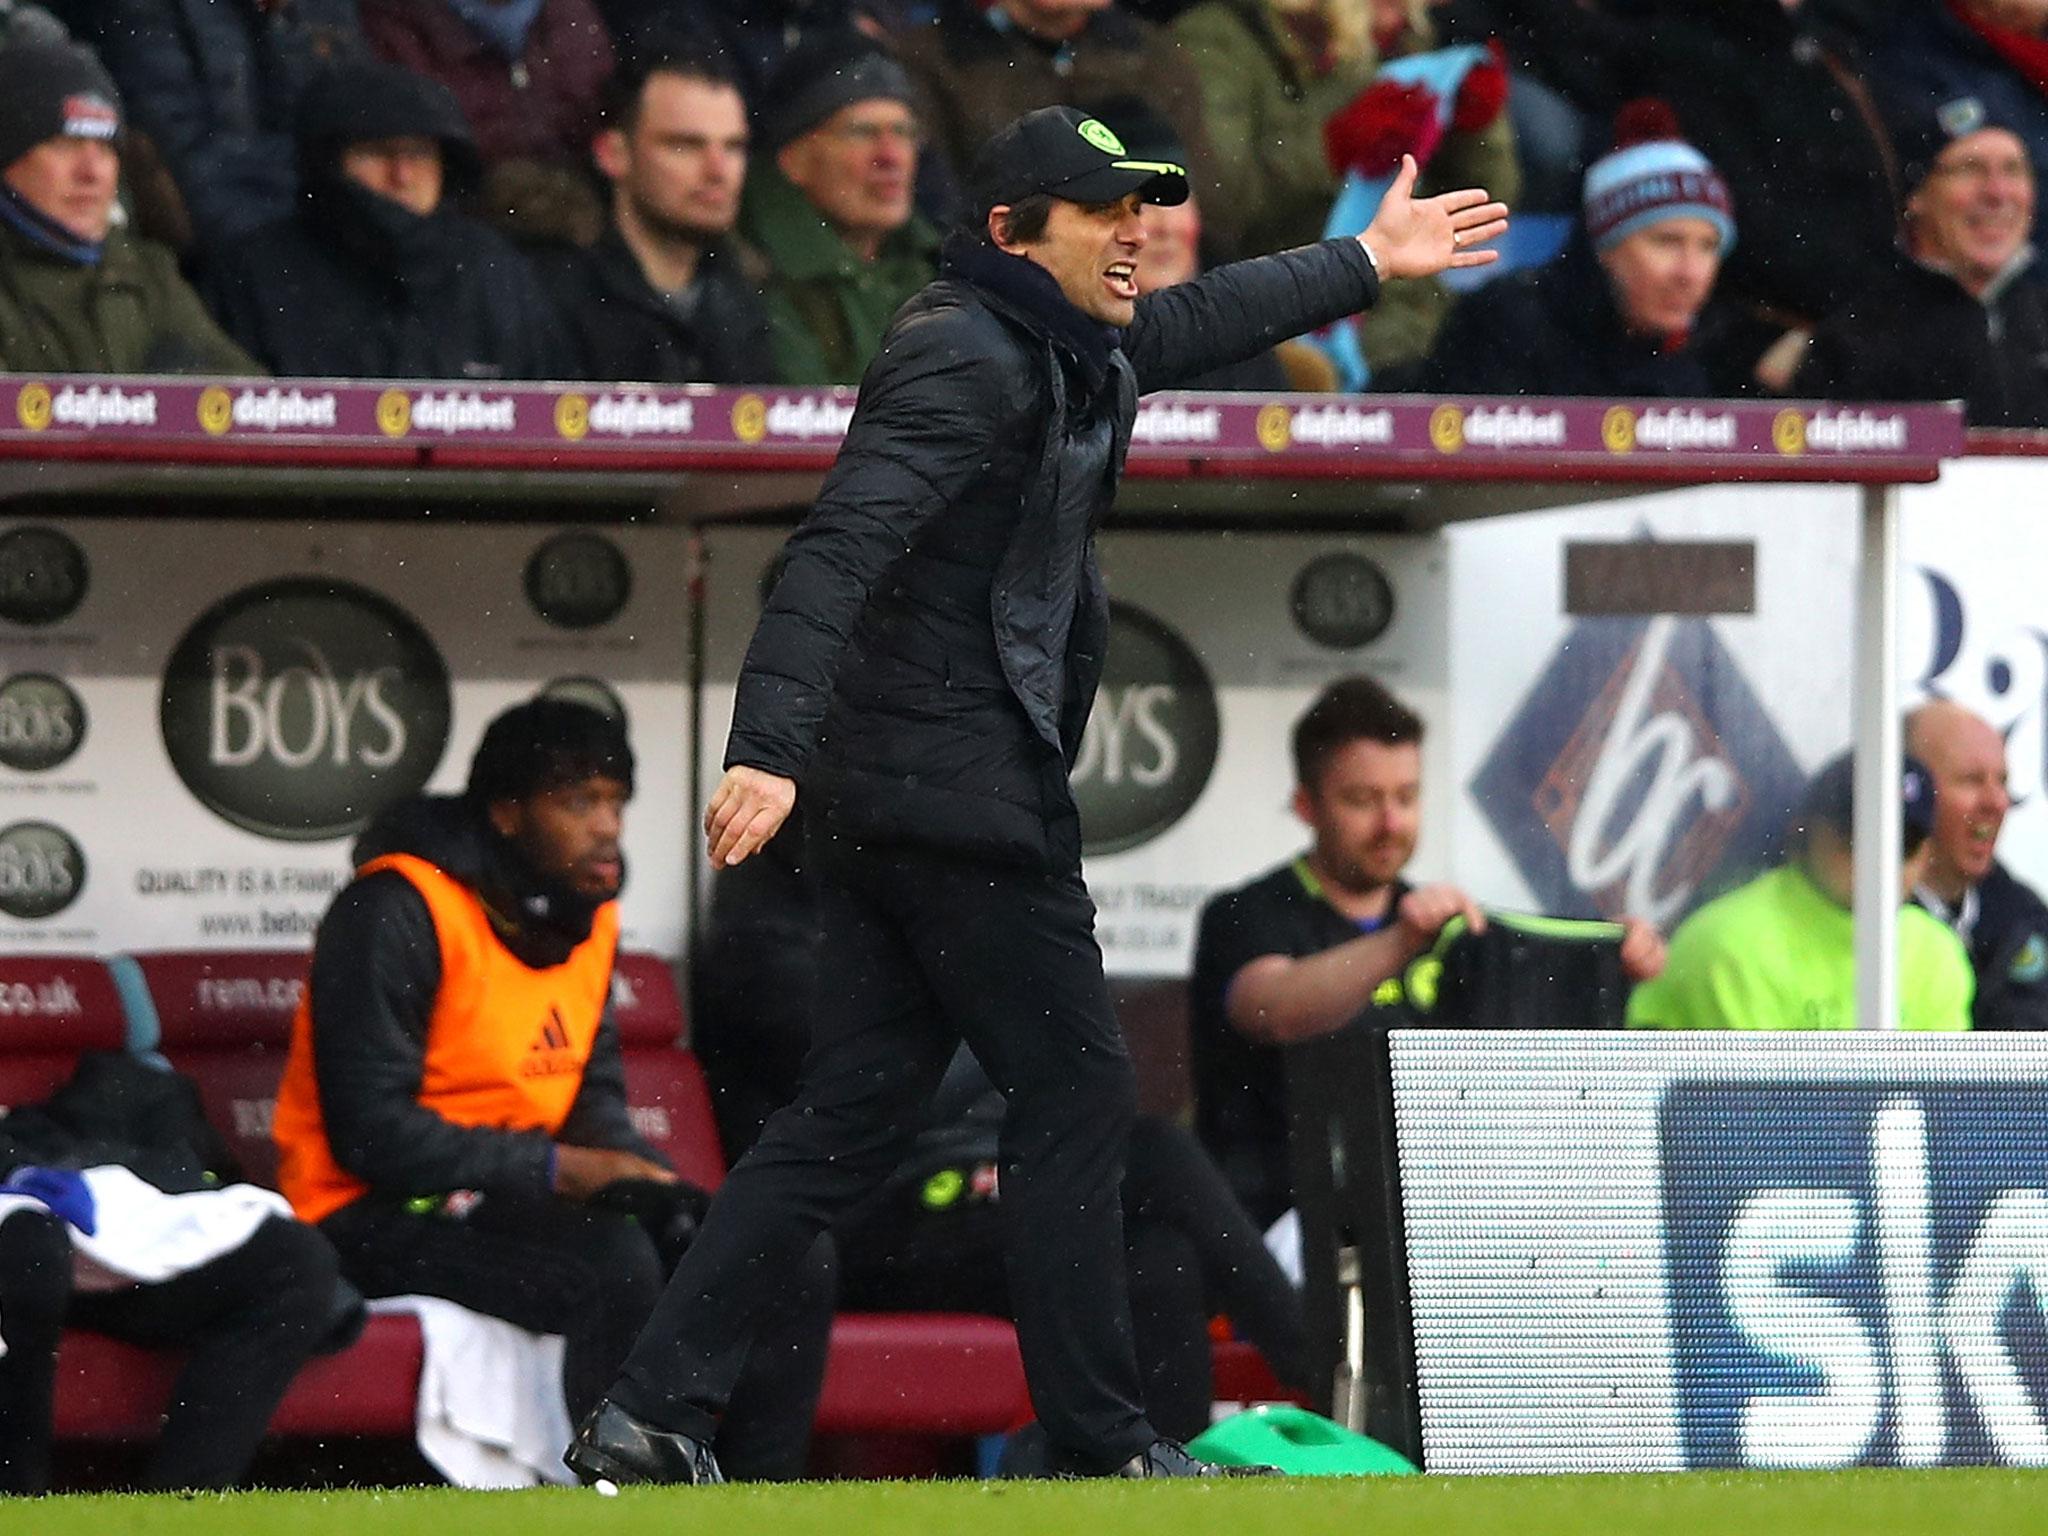 Conte's side were unable to break down a resilient Burnley team